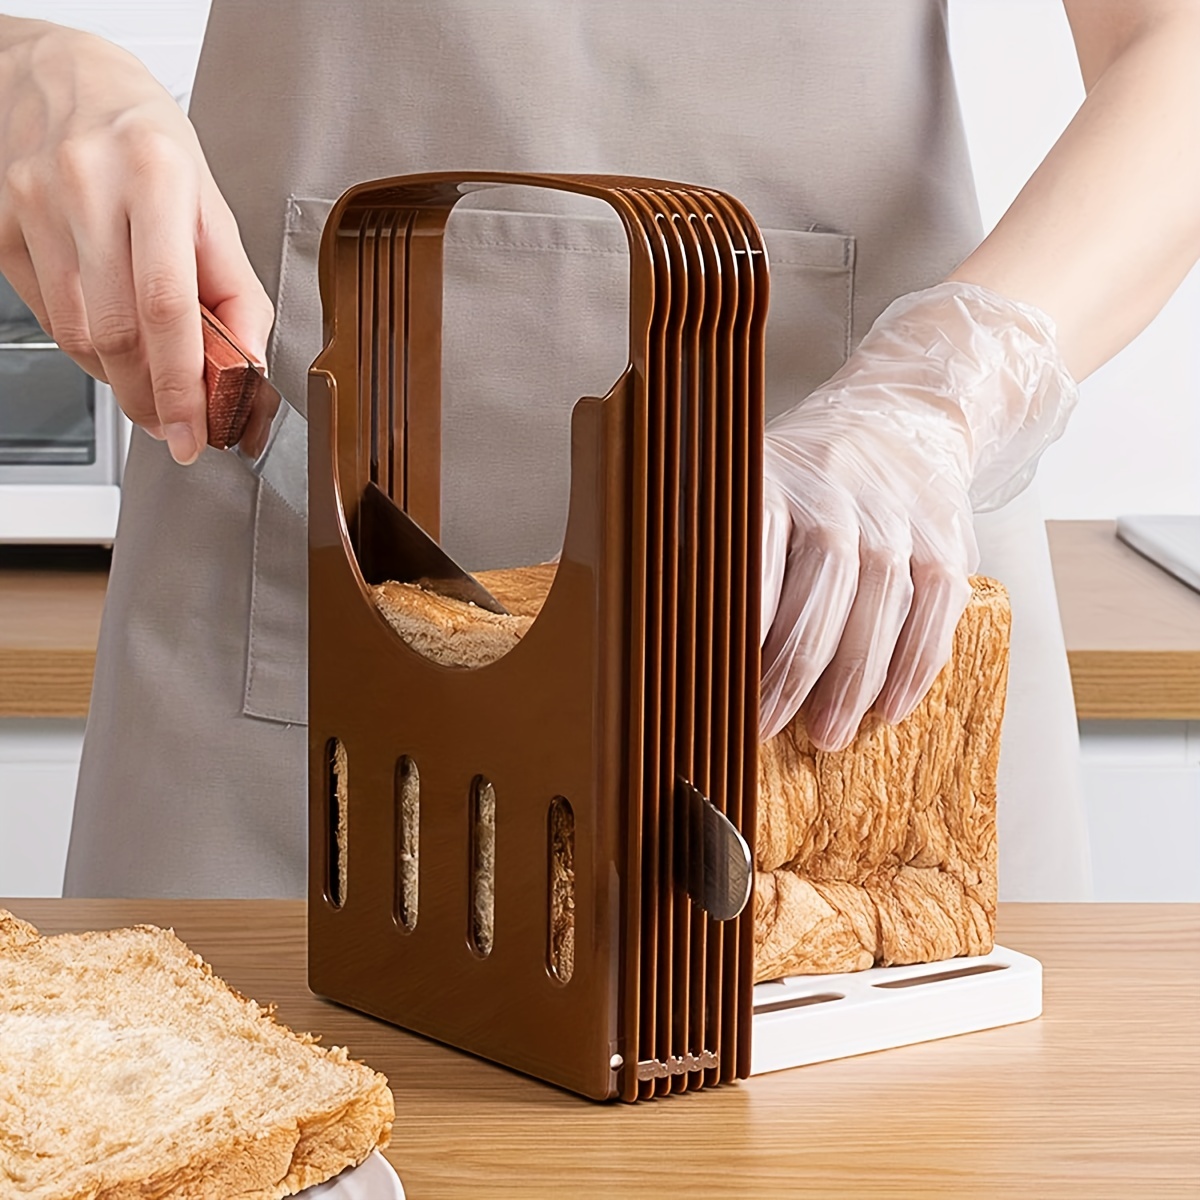 Bread Slicer Cutting Guide for Homemade Bread. Adjustable 